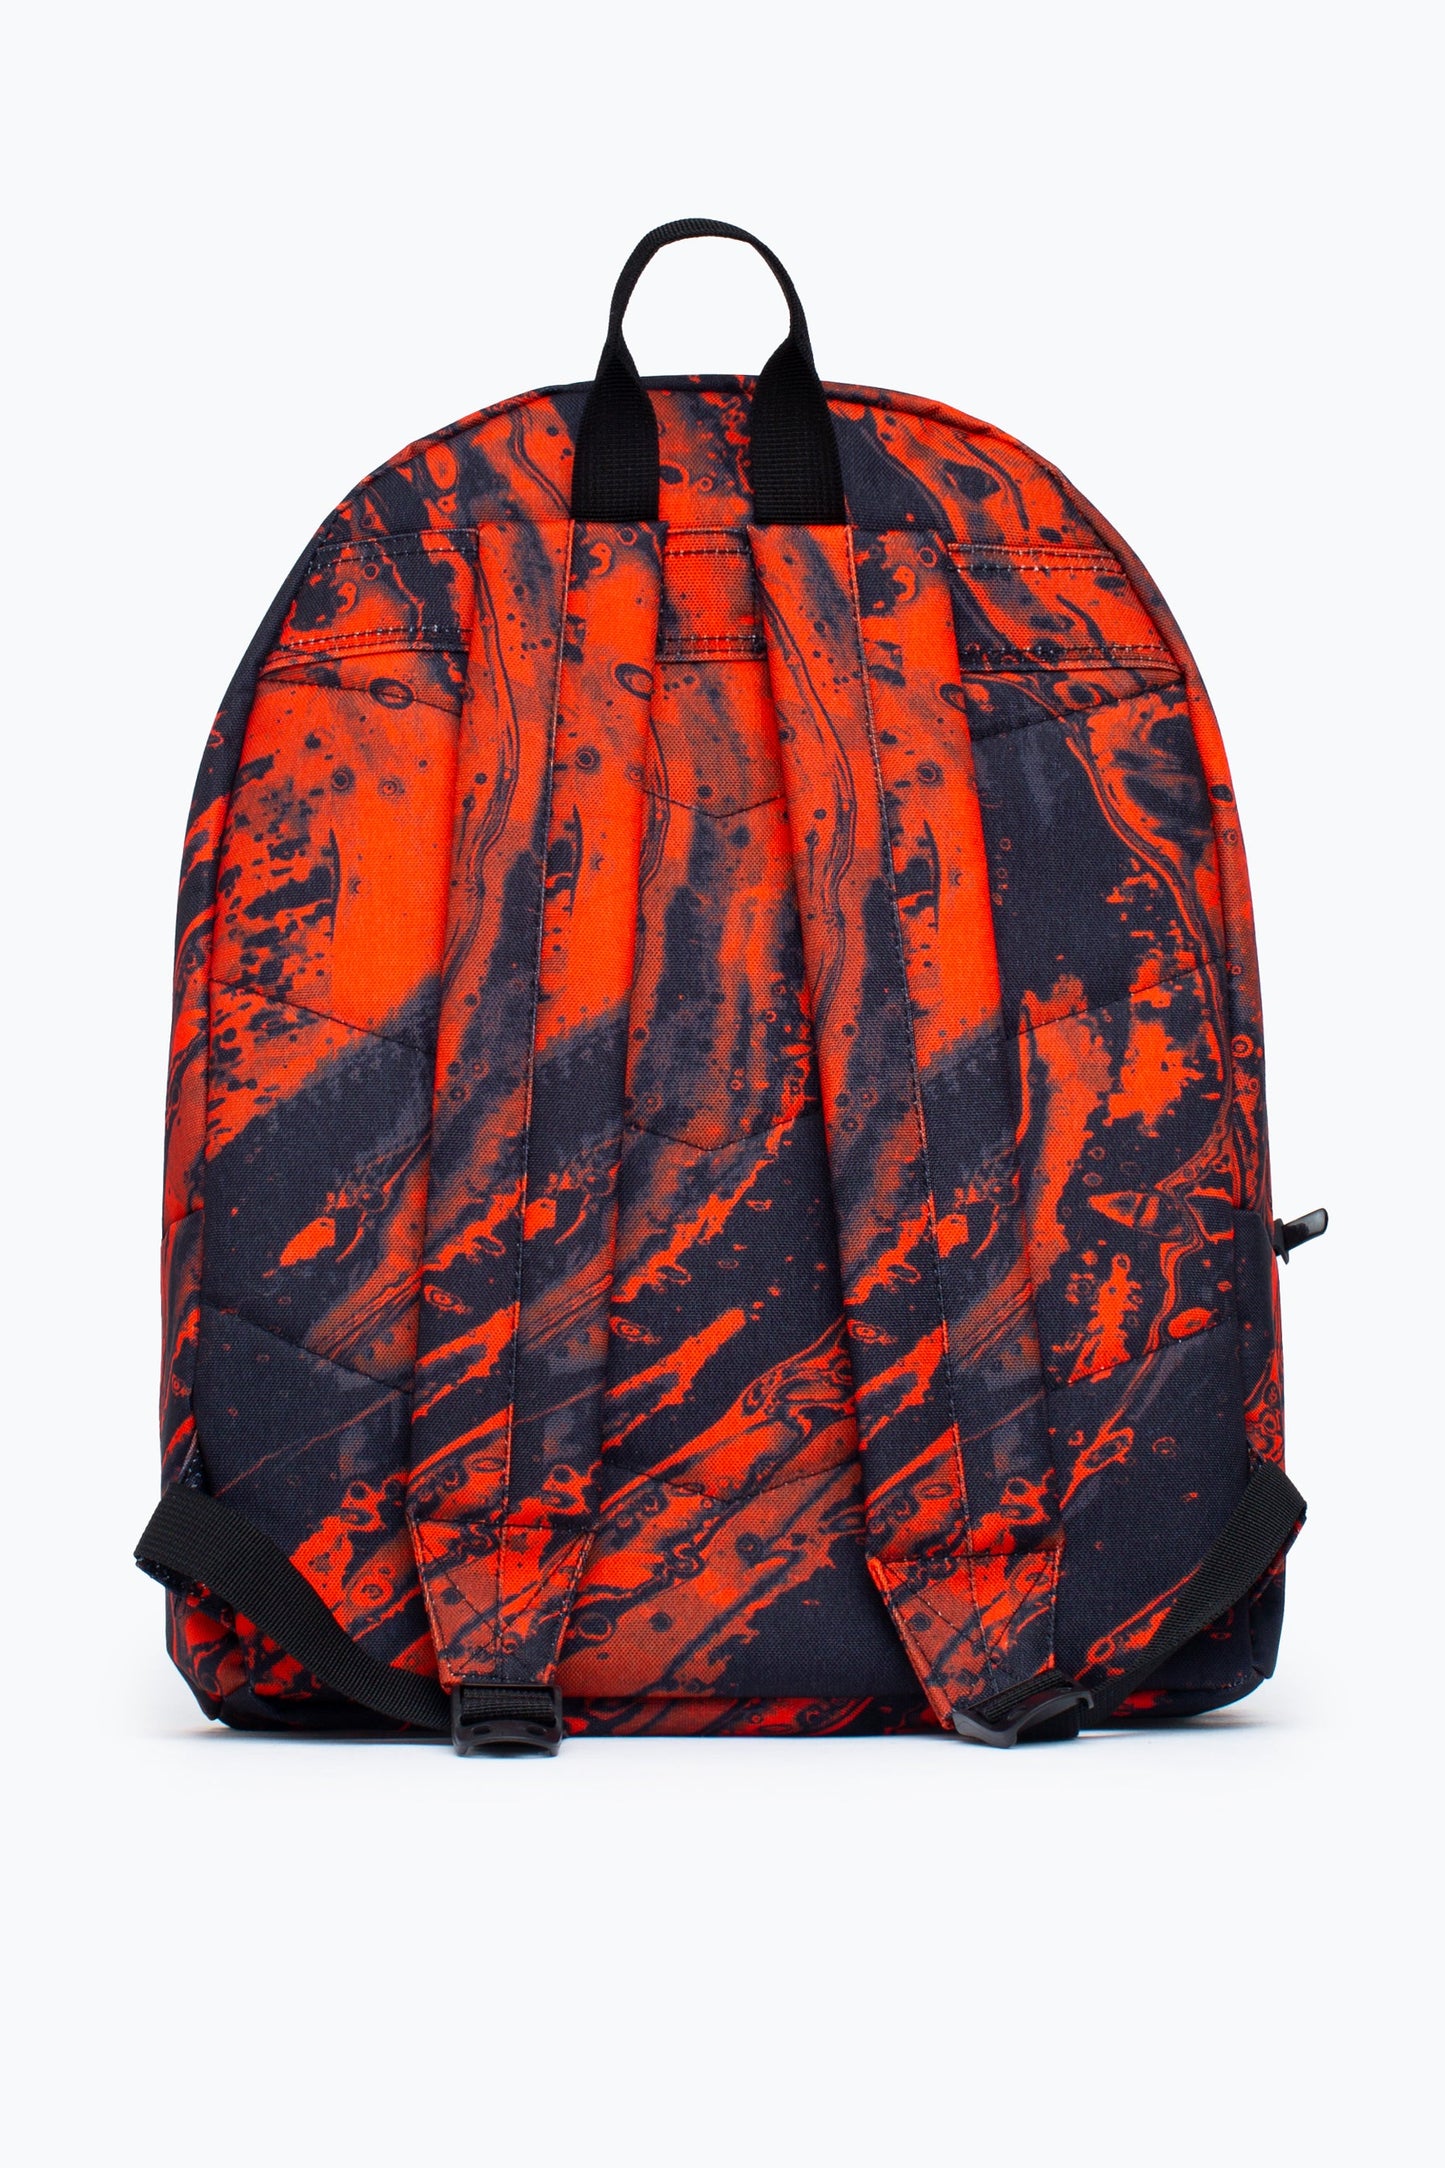 HYPE UNISEX BLACK RED MARBLE WAVE CREST BACKPACK